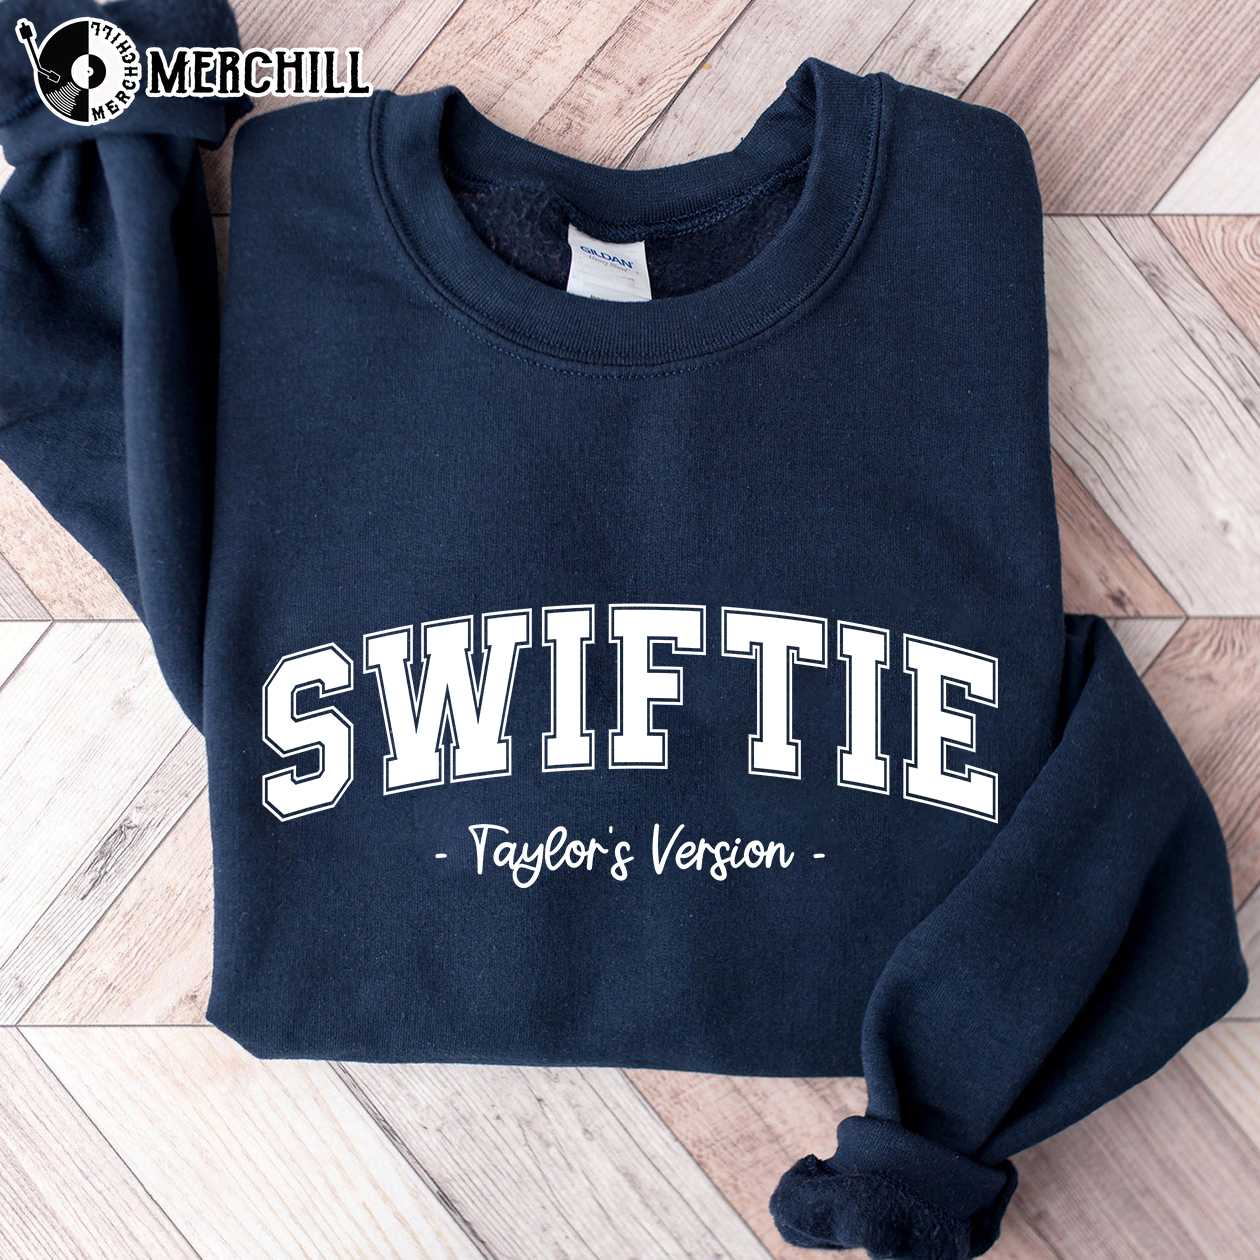 30 Taylor Swift gifts for the Swiftie in your life 